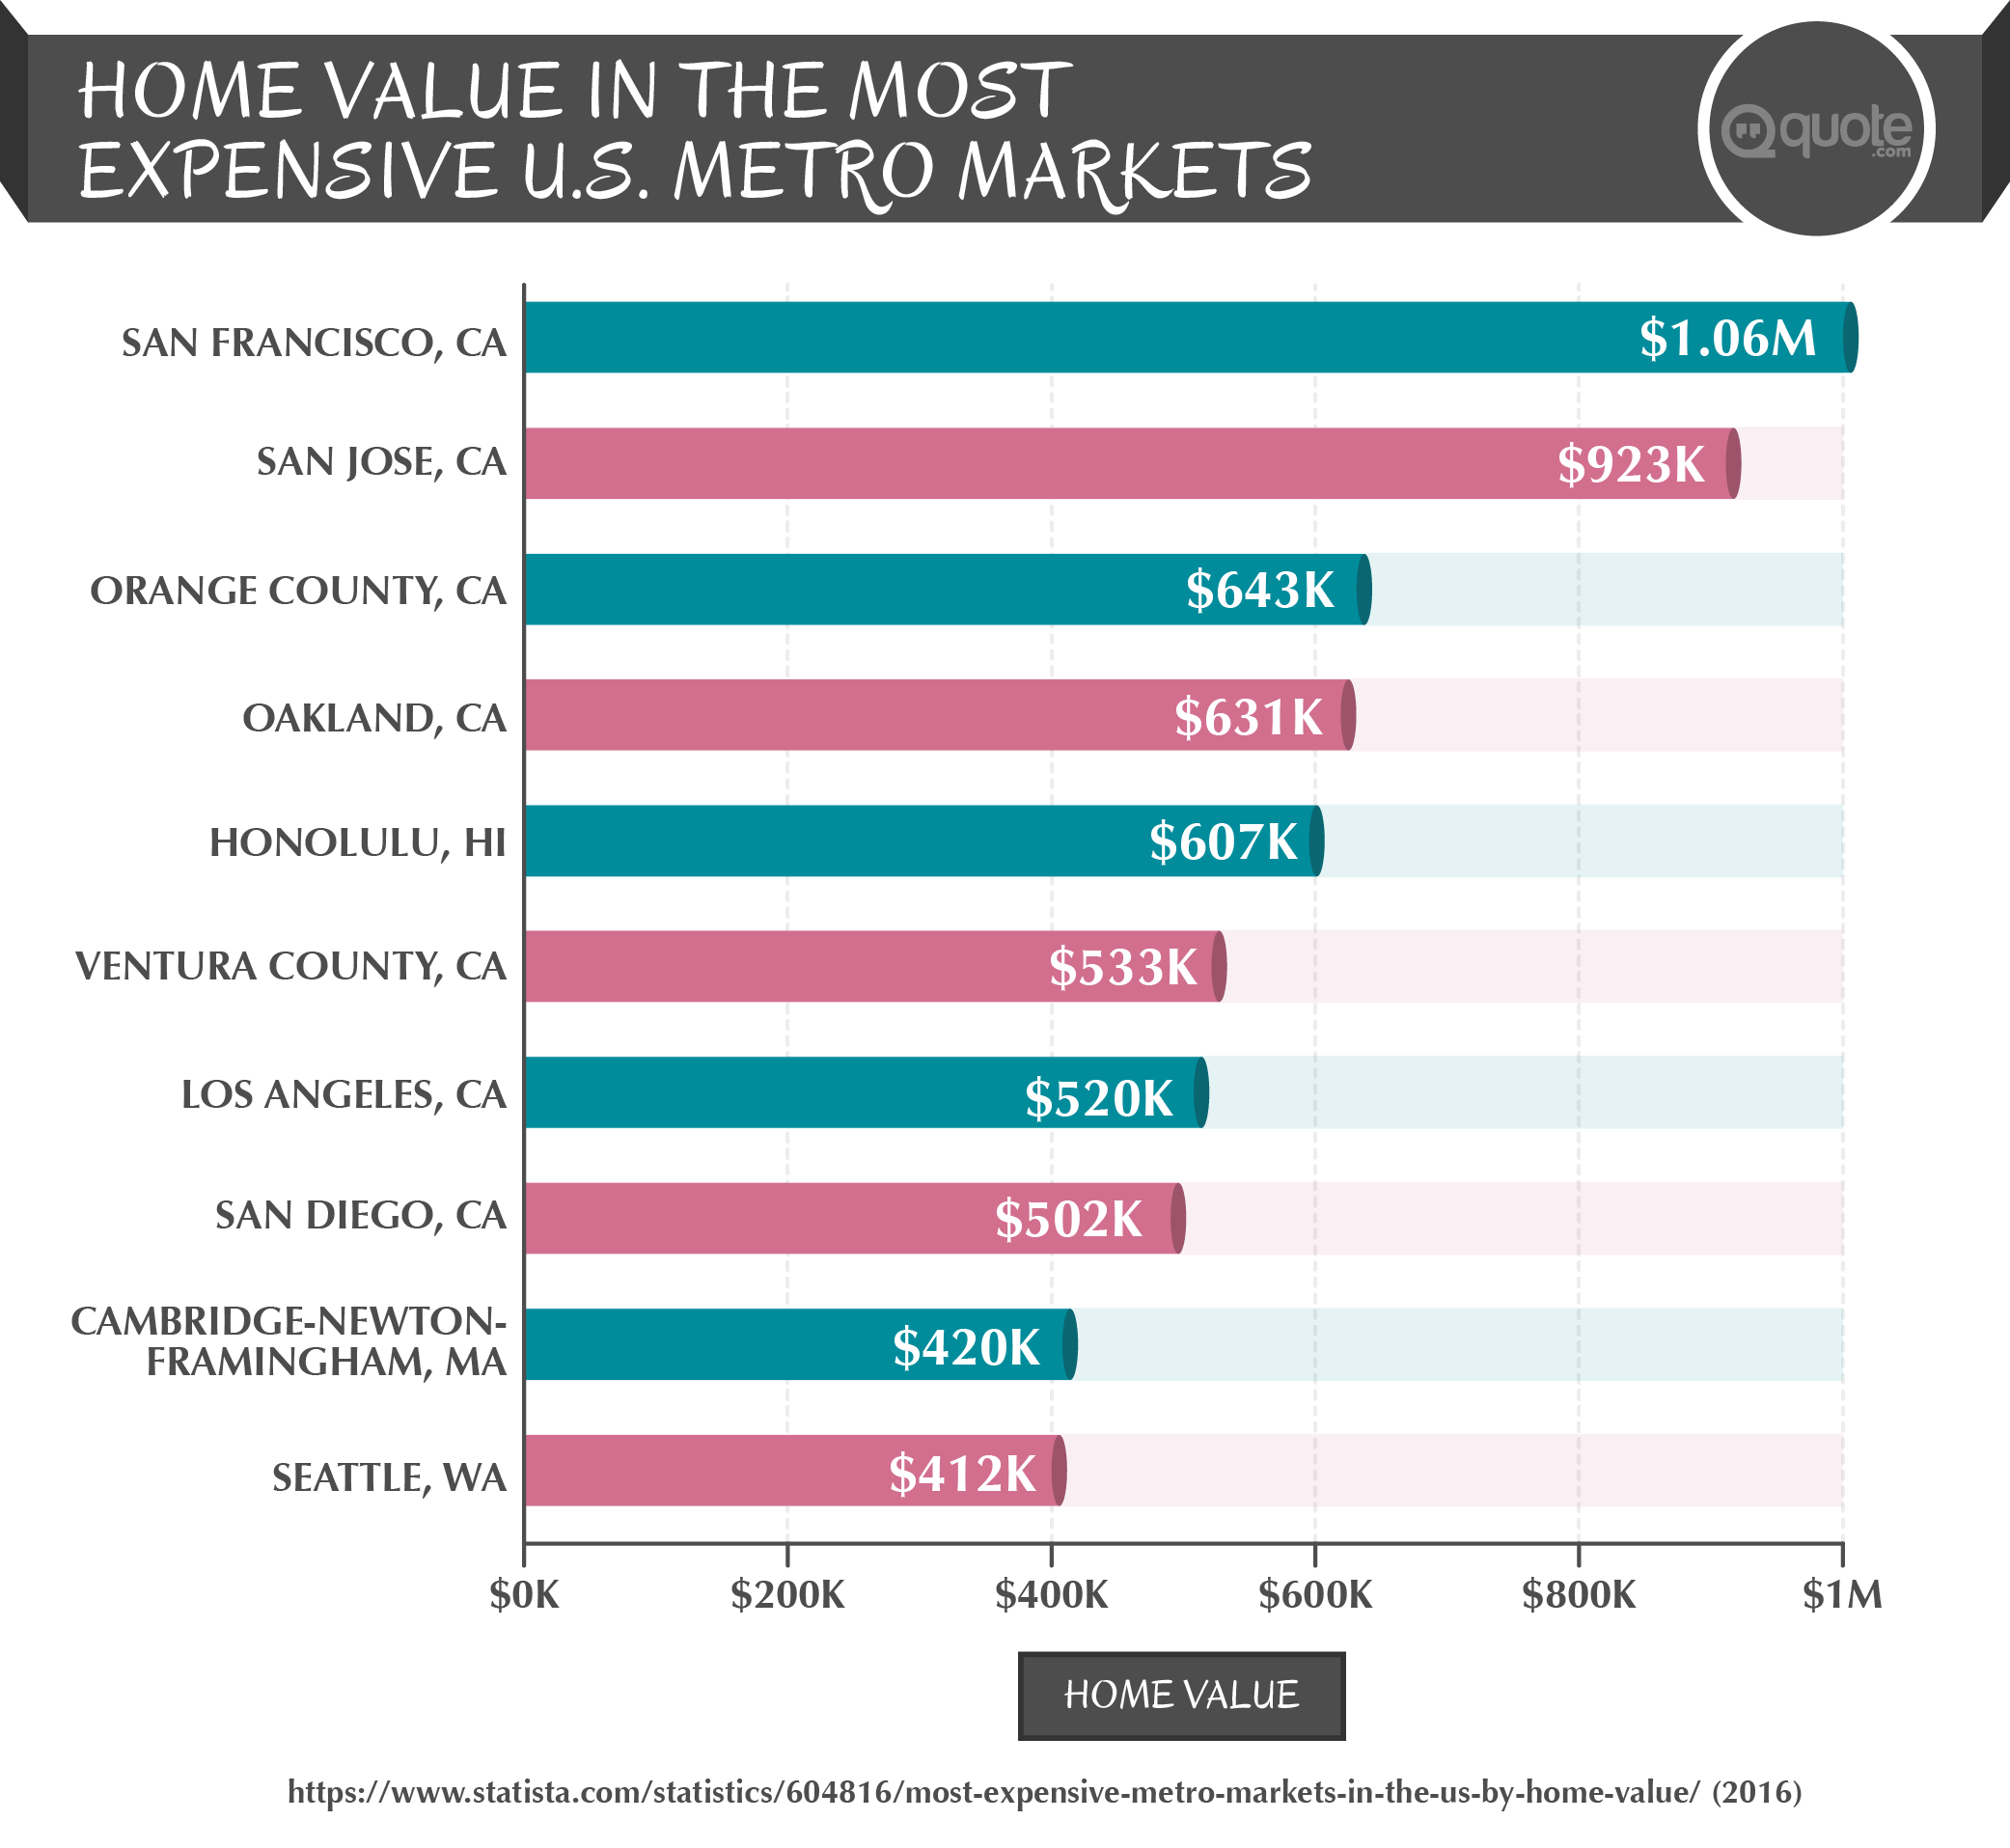 Home Value in the Most Expensive U.S. Metro Markets